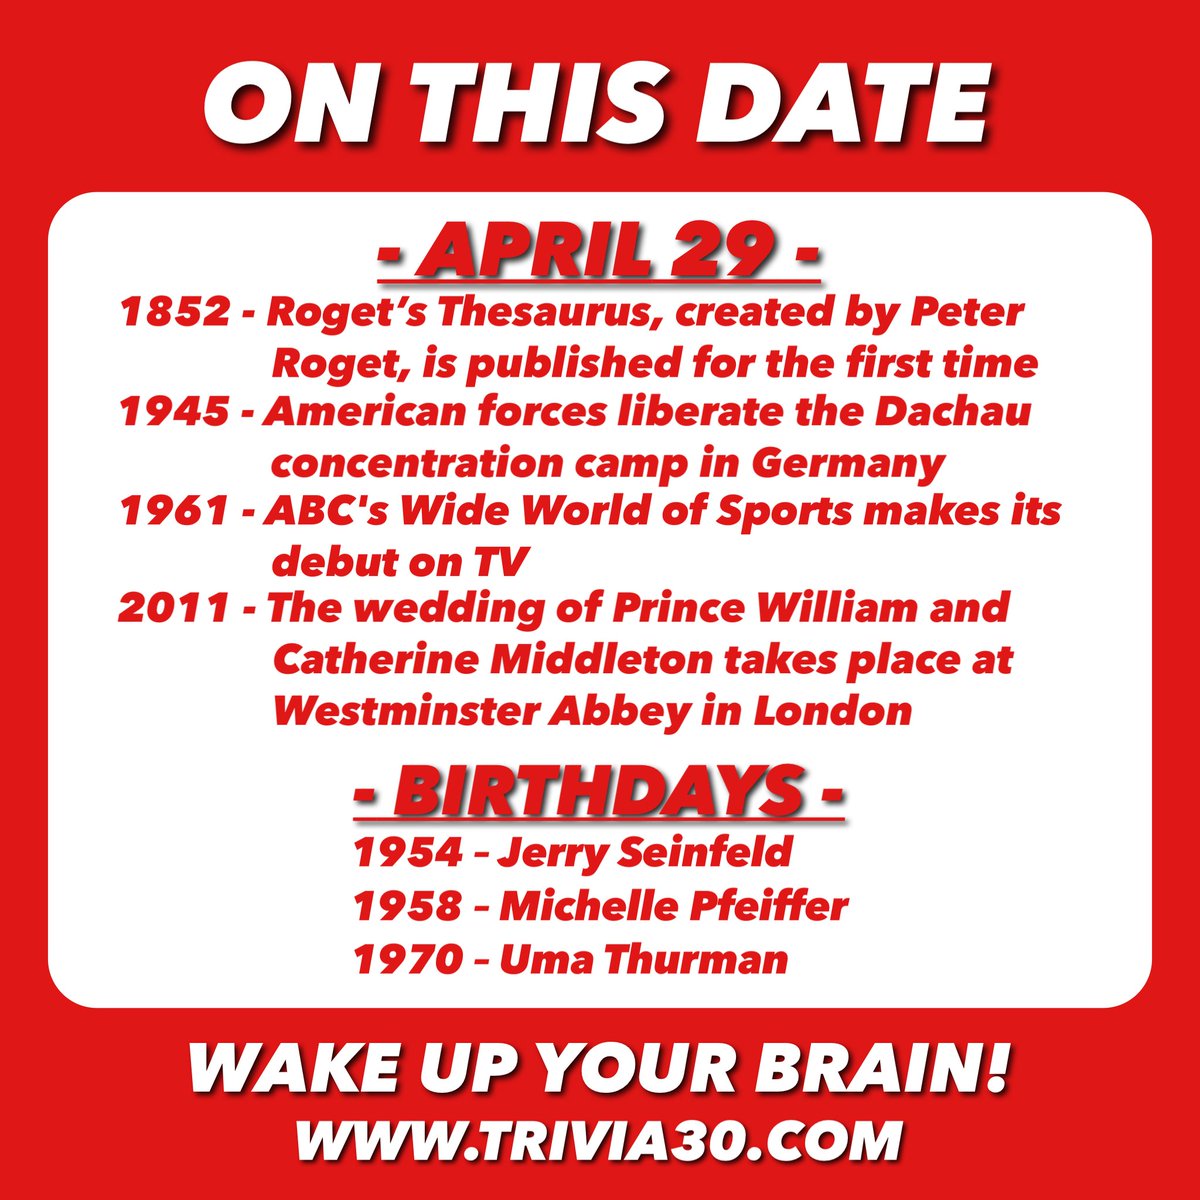 Your OTD trivia for 4/29... Join us for trivia tonight at Dicks Wings, and have a great Saturday! #TRIVIA30 #WakeUpYourBrain #OnThisDay #Roget #thesaurus #WWII #Germany #dachau #ABC #WideWorldOfSports #PrinceWilliam #KateMiddleton #JerrySeinfeld #MichellePfeiffer #UmaThurman